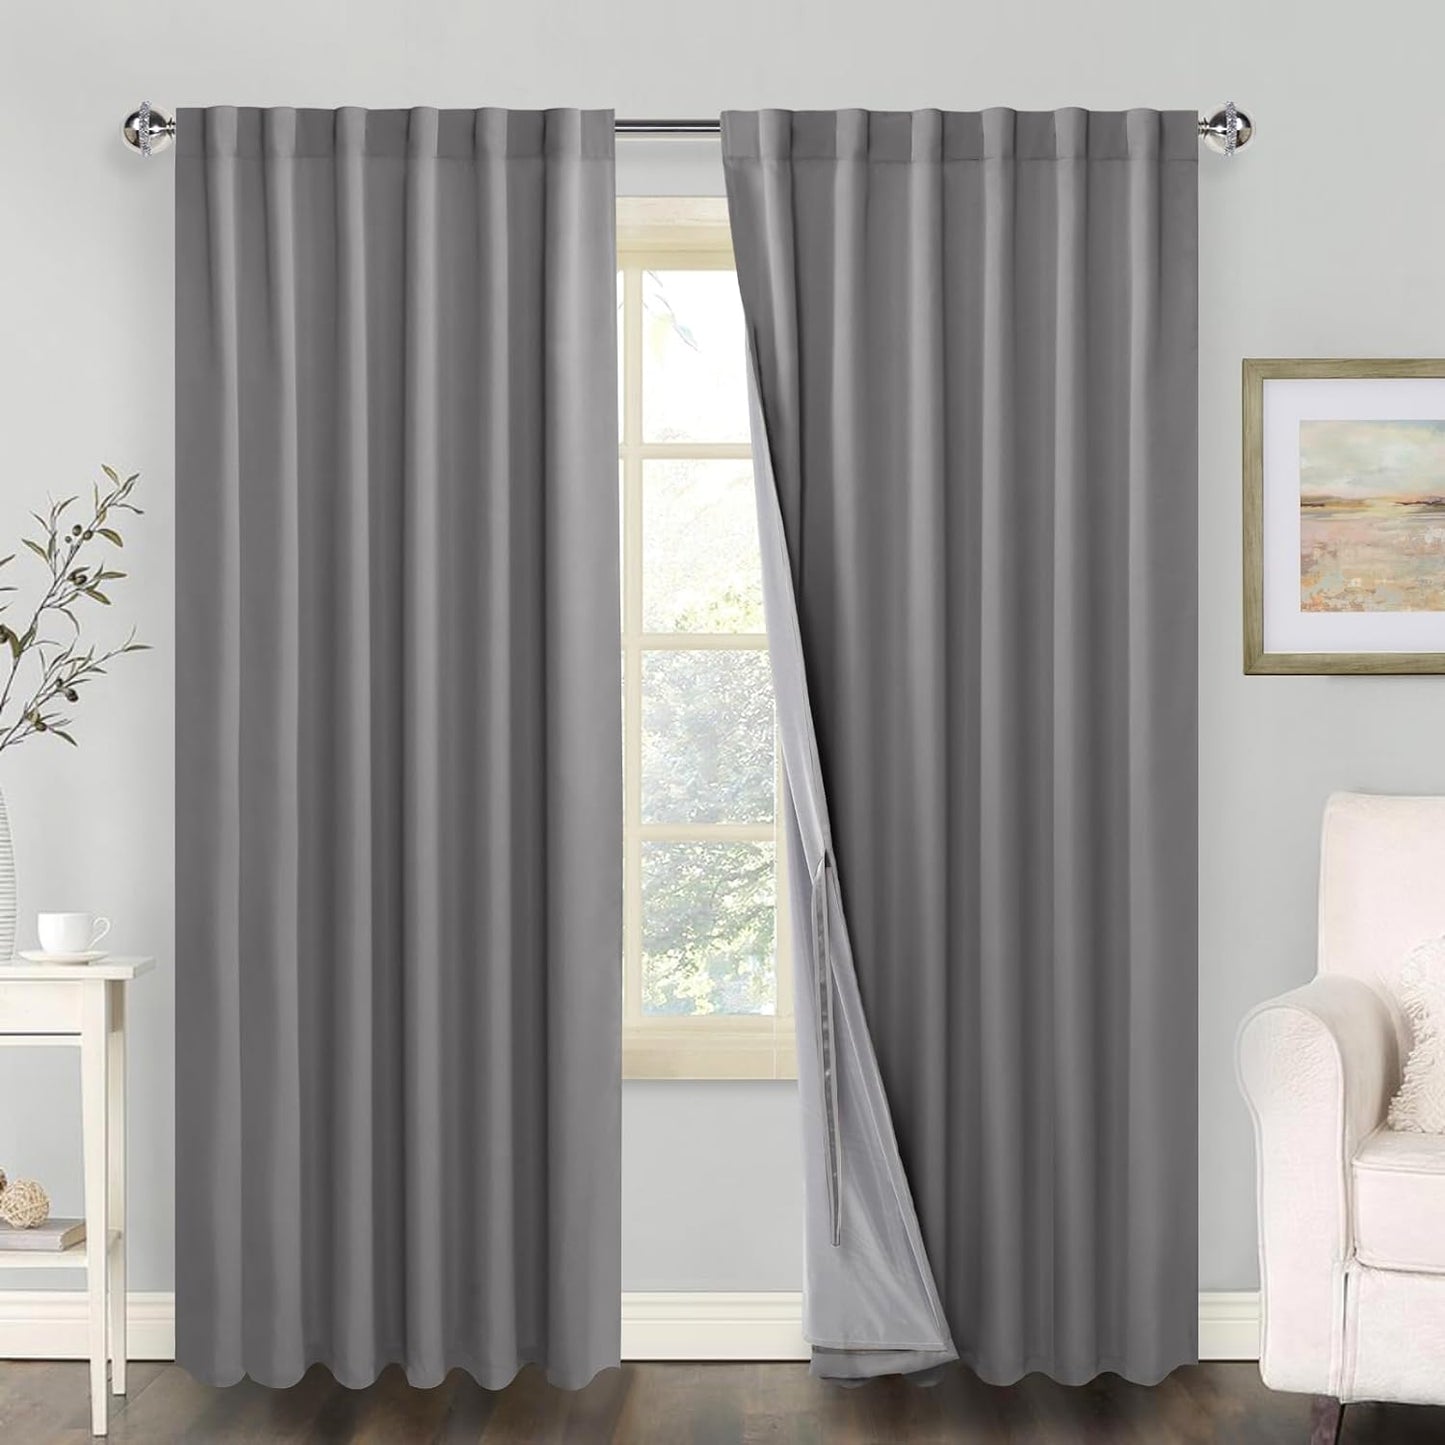 100% Blackout Curtains 2 Panels with Tiebacks- Heat and Full Light Blocking Window Treatment with Black Liner for Bedroom/Nursery, Rod Pocket & Back Tab，White, W52 X L84 Inches Long, Set of 2  XWZO Light Grey W52" X L108"|2 Panels 